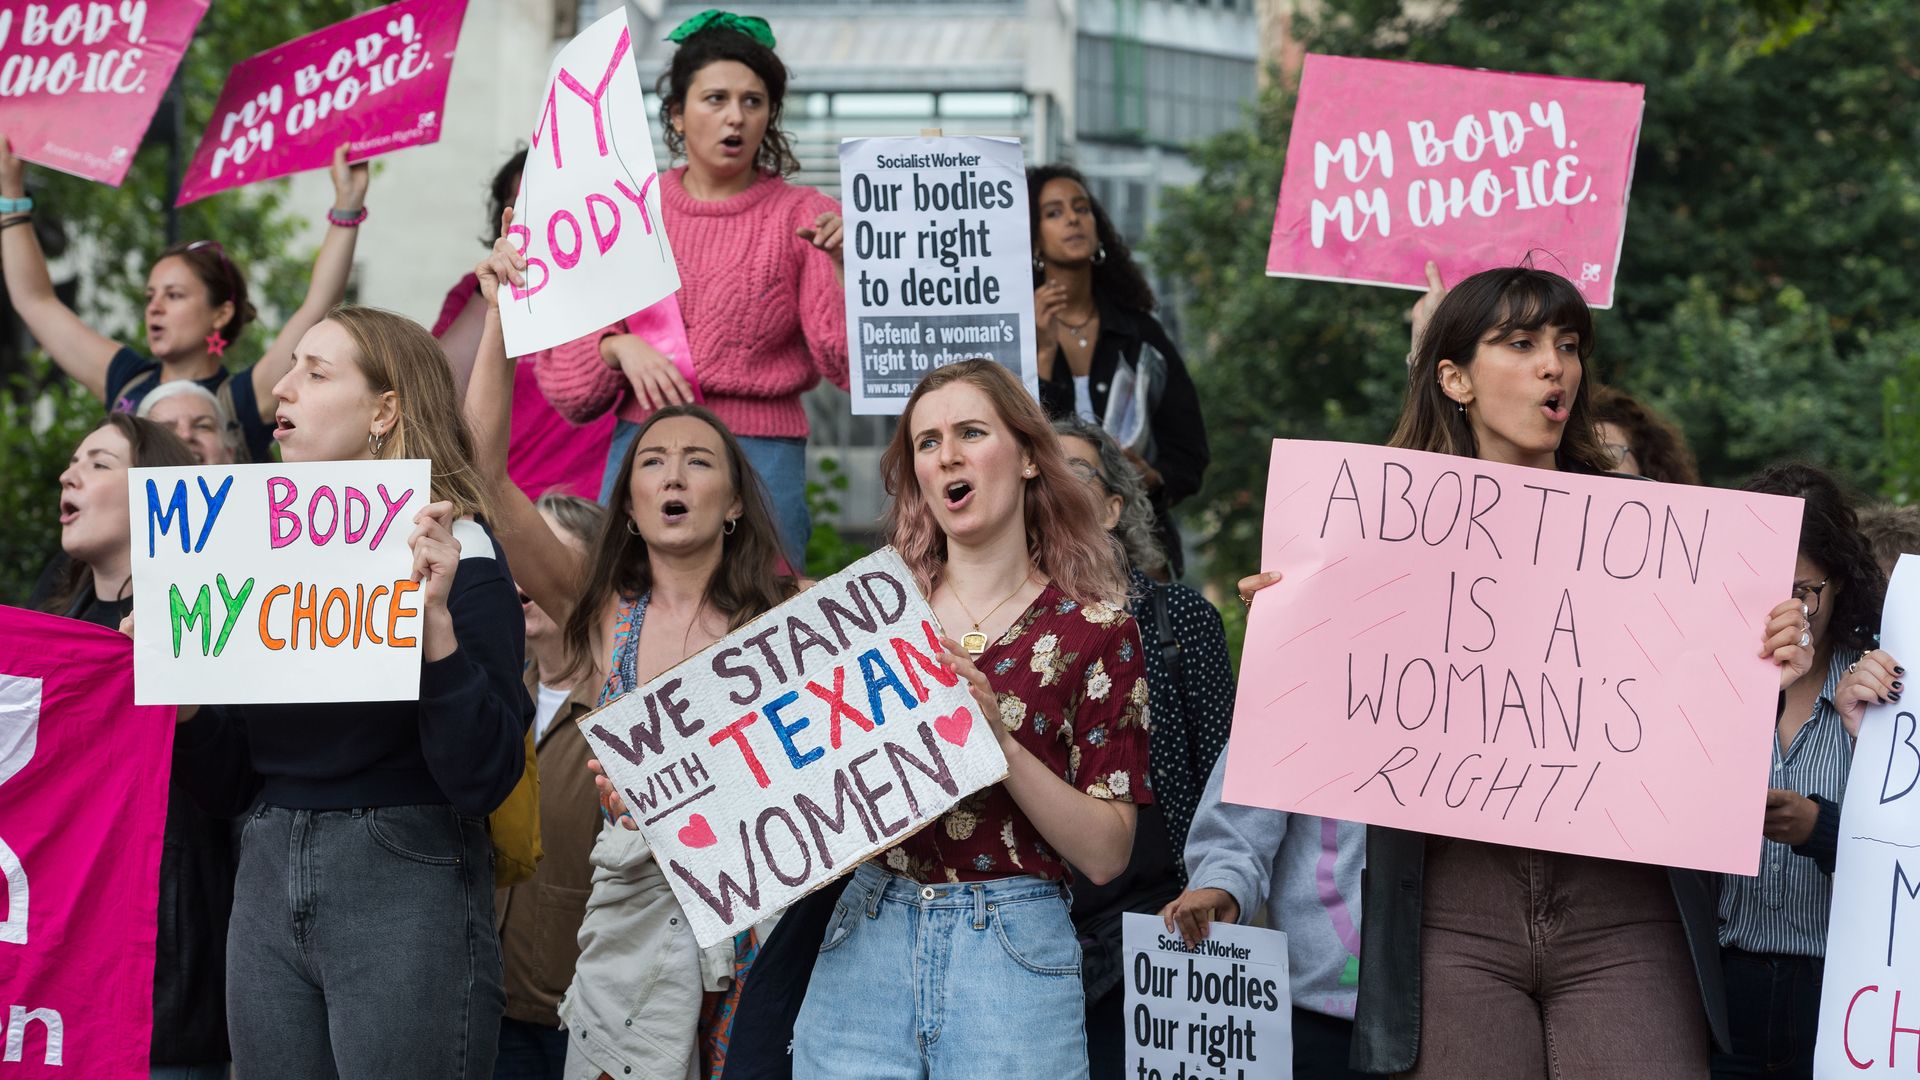 A group of women hold pink and white signs protesting texas abortion ban at an outdoor gathering.